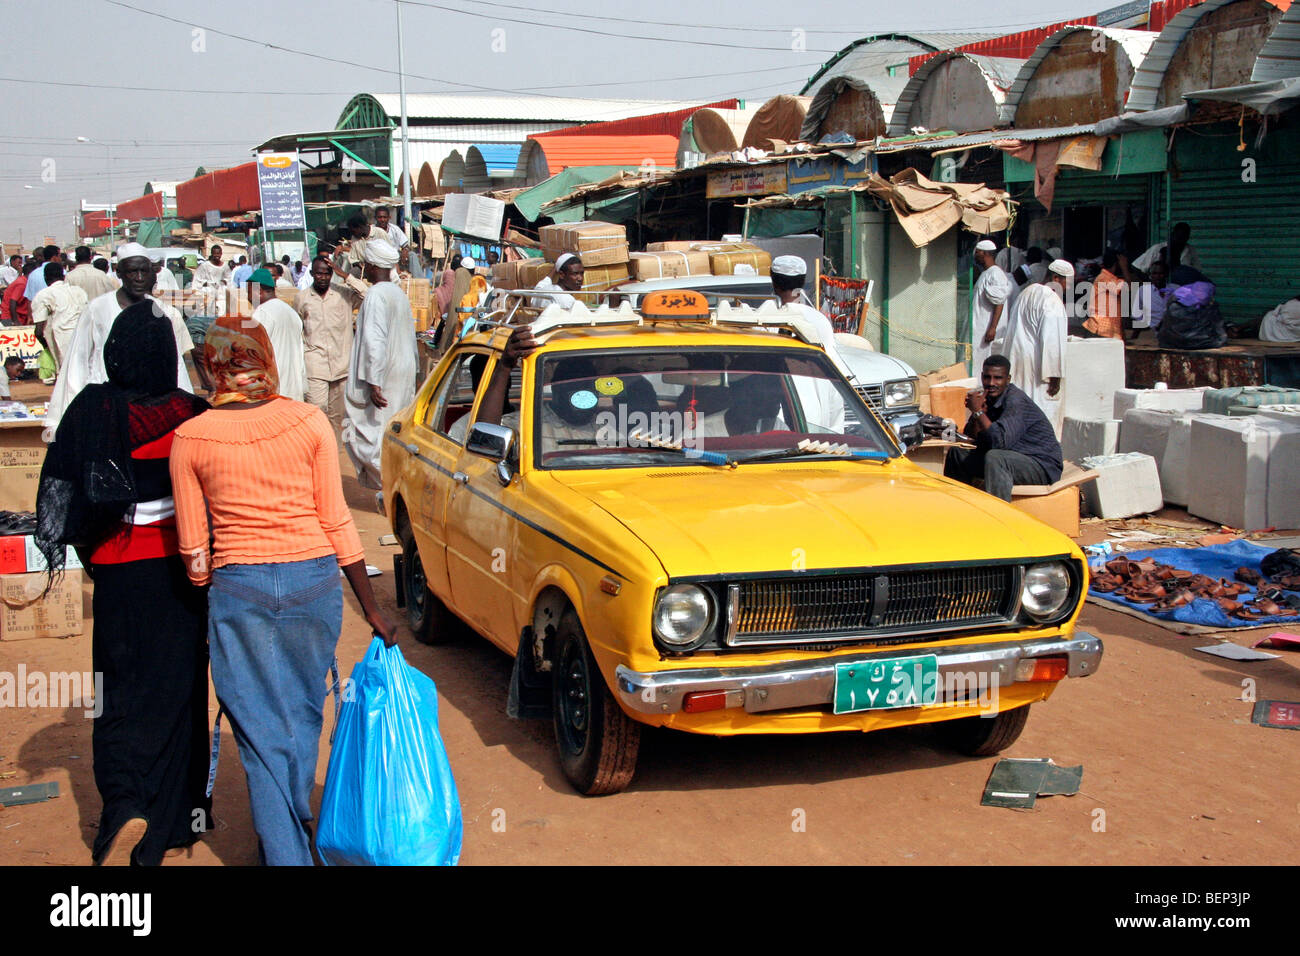 Street scene showing yellow taxi and Nubian people shopping at market in the city Omdurman, Khartoum, Sudan, North Africa Stock Photo